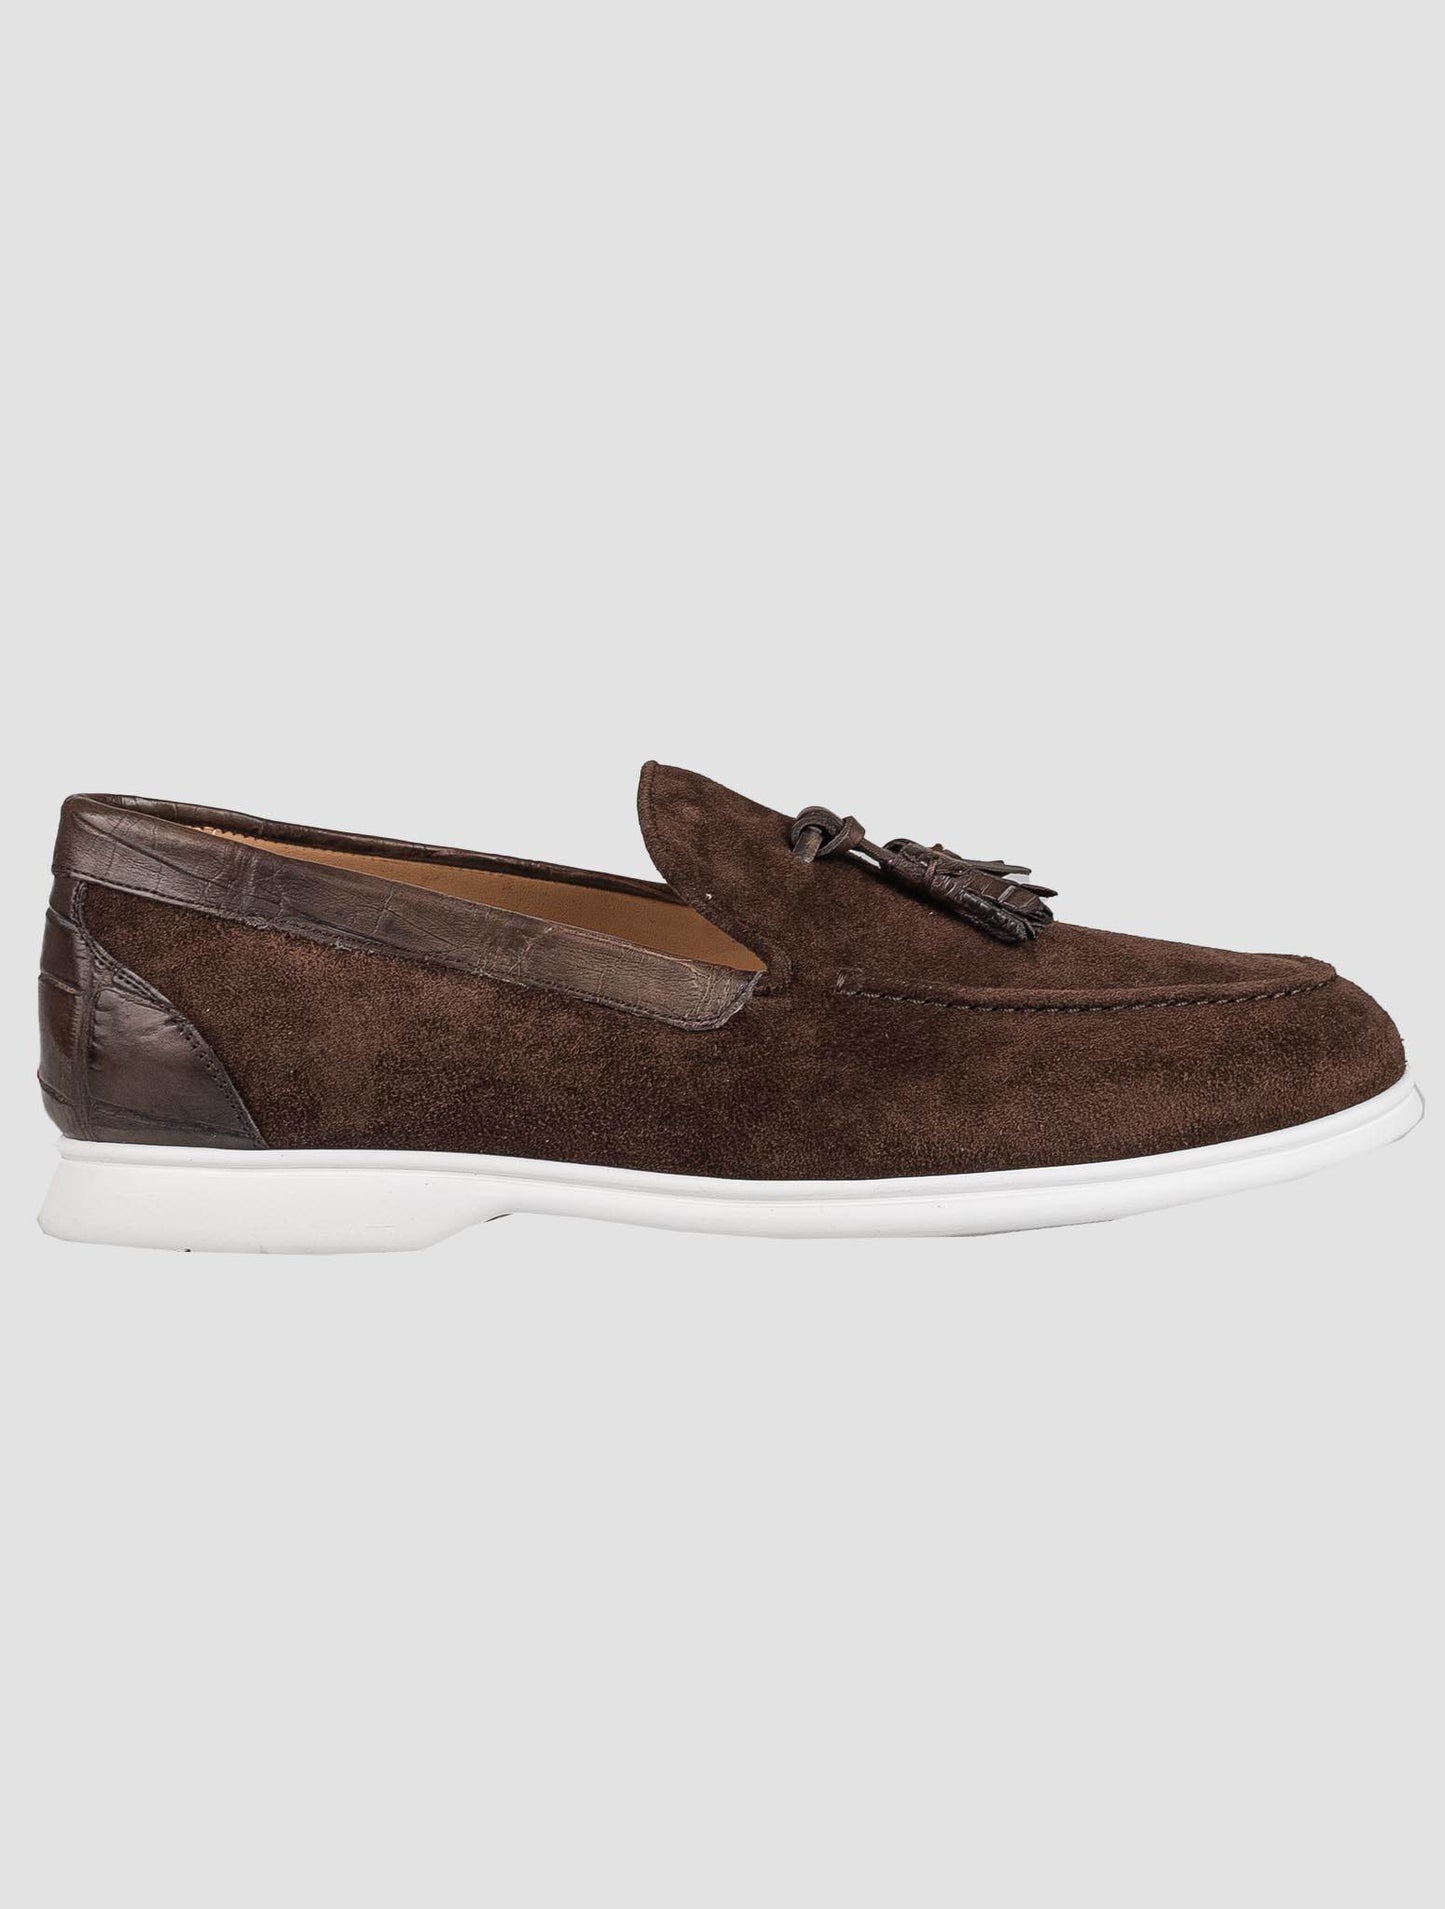 Kiton Brown Leather Crocodile Leather Suede Loafers